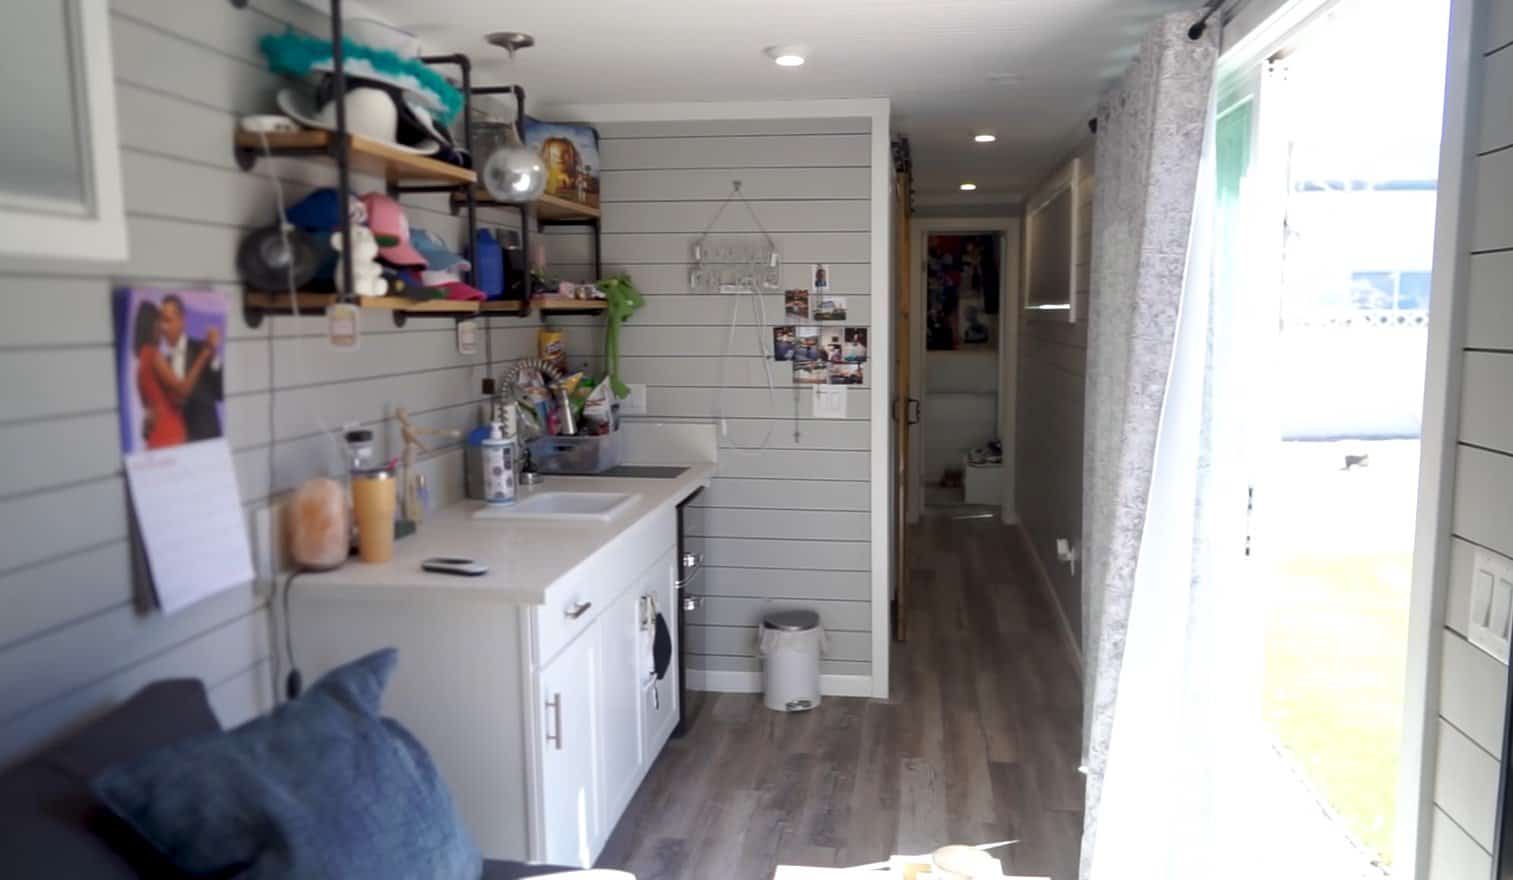 Inside the container home